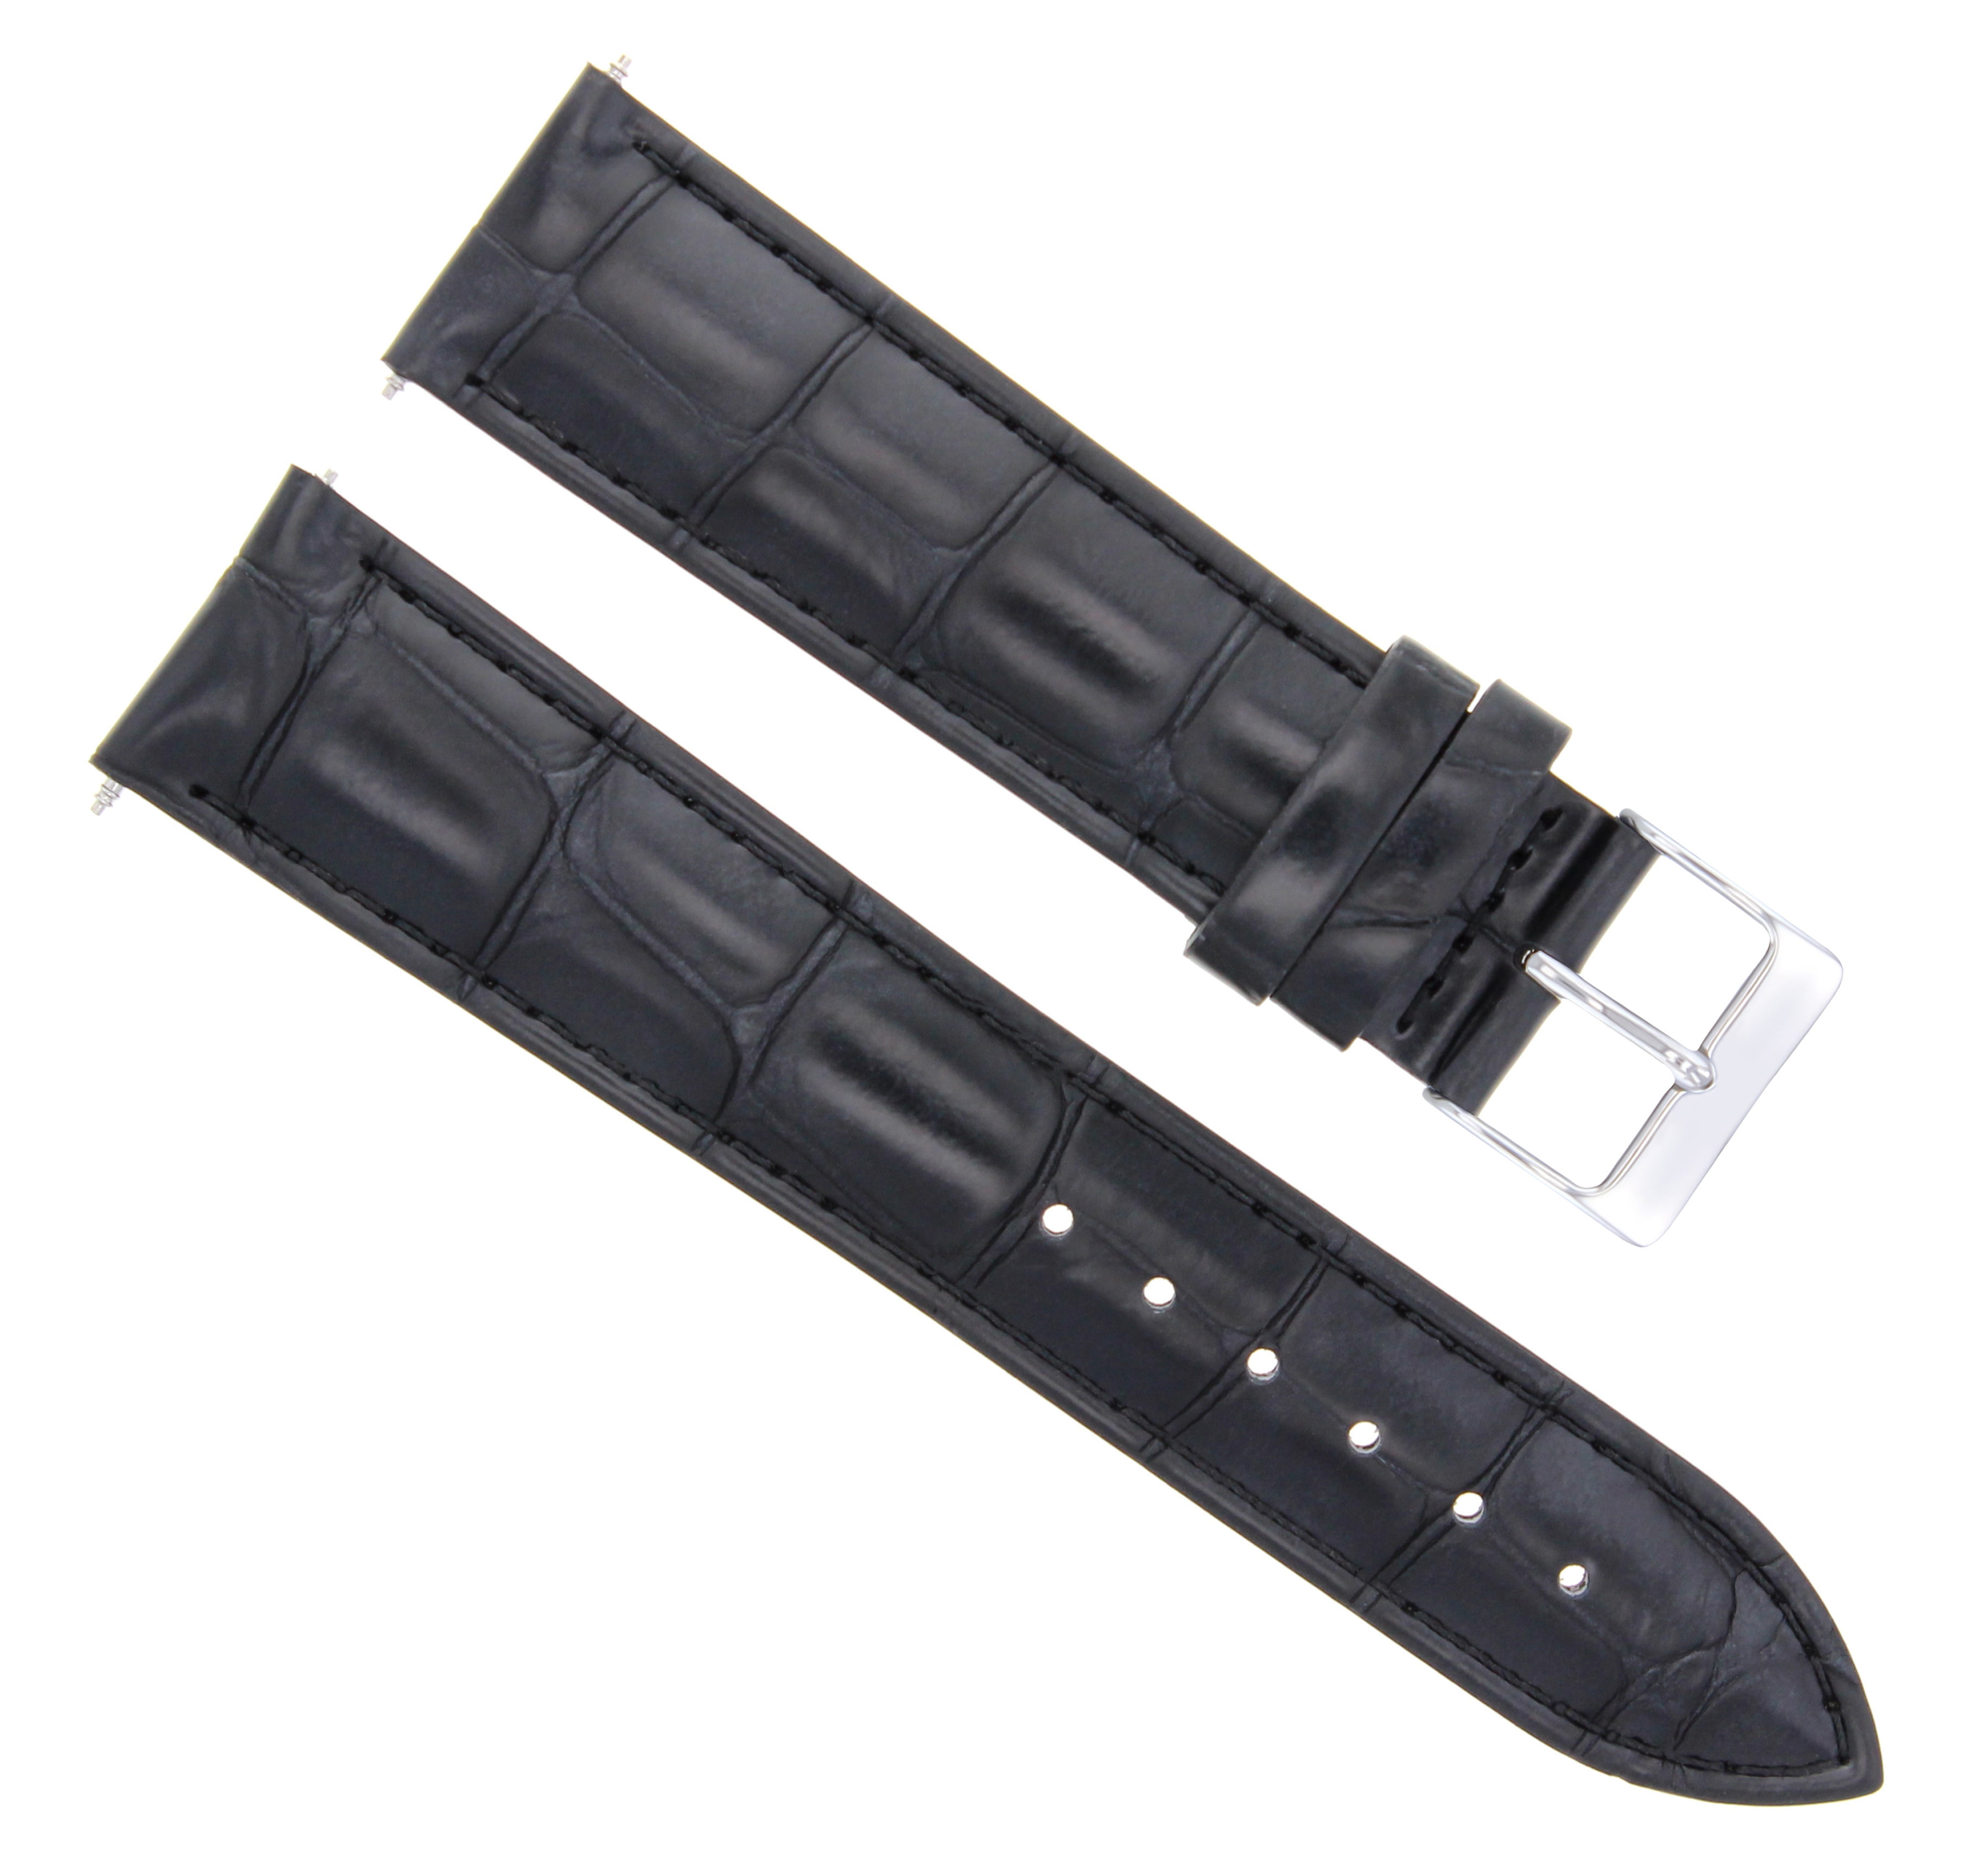 19MM GENUINE LEATHER WATCH BAND STRAP FOR ORIENT WATCH 19/18MM BLACK